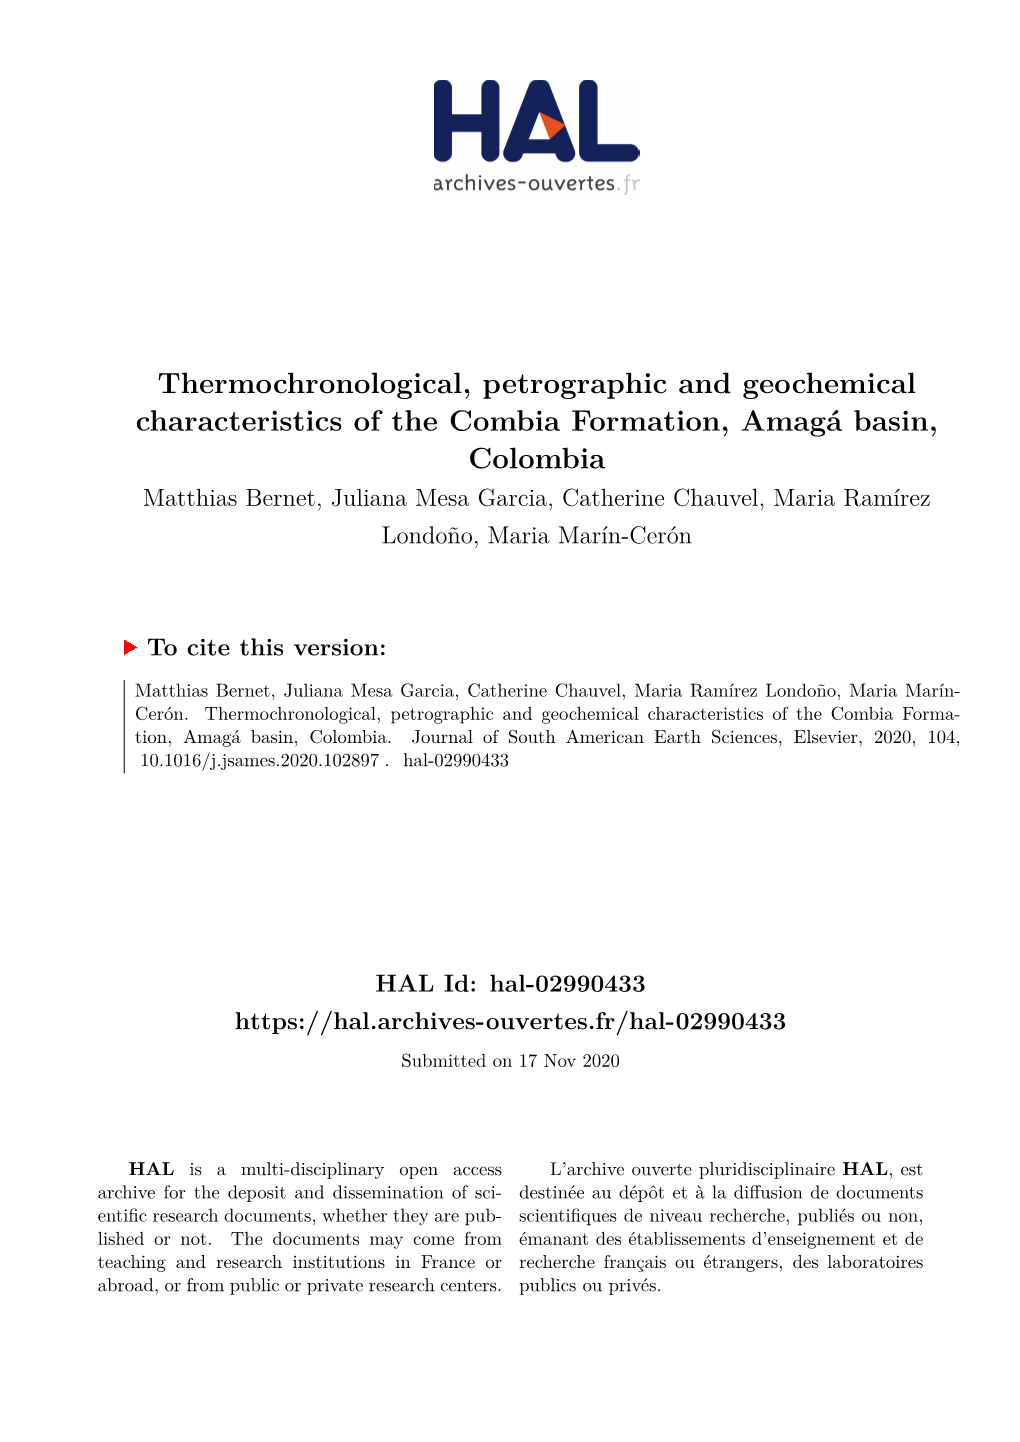 Thermochronological, Petrographic and Geochemical Characteristics of the Combia Formation, Amagá Basin, Colombia